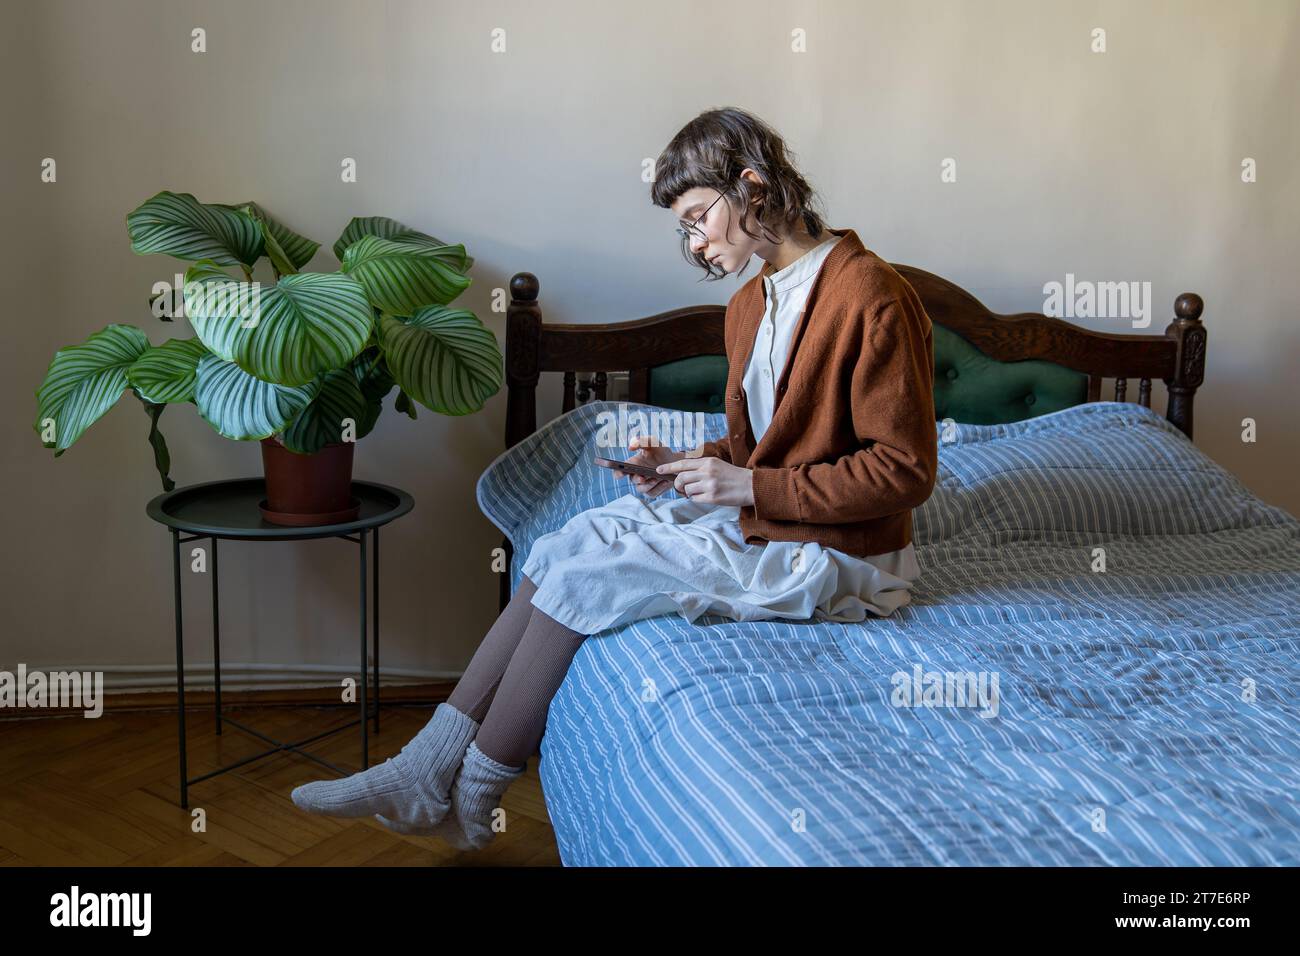 Unsociable teen girl sitting on bed with smartphone, scrolling, feeling lonely, rejected, unhappy Stock Photo